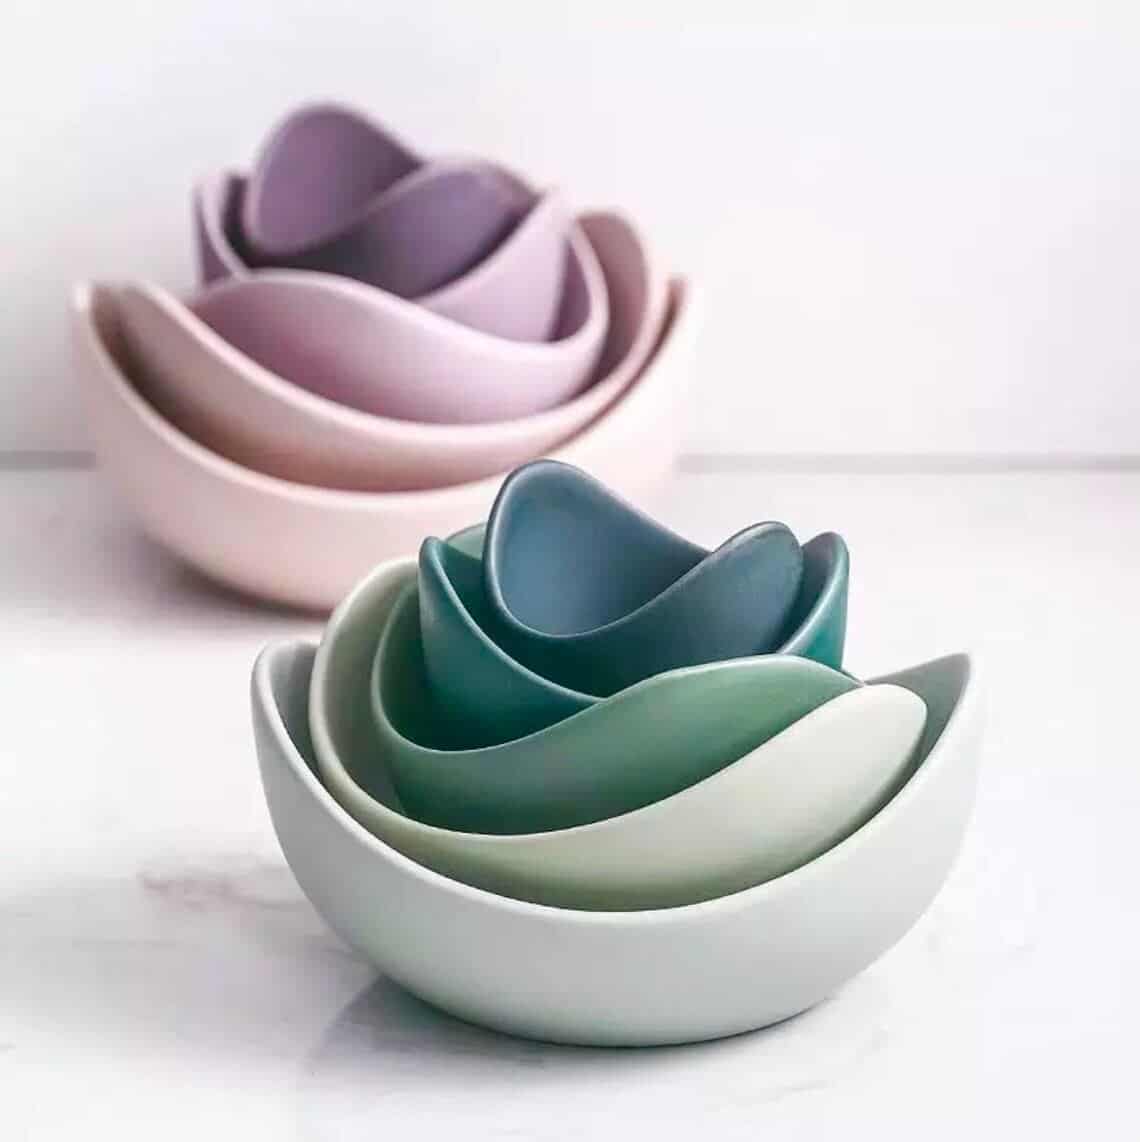 A stack of green ceramic bowls with a stack of pink ceramic bowls behind